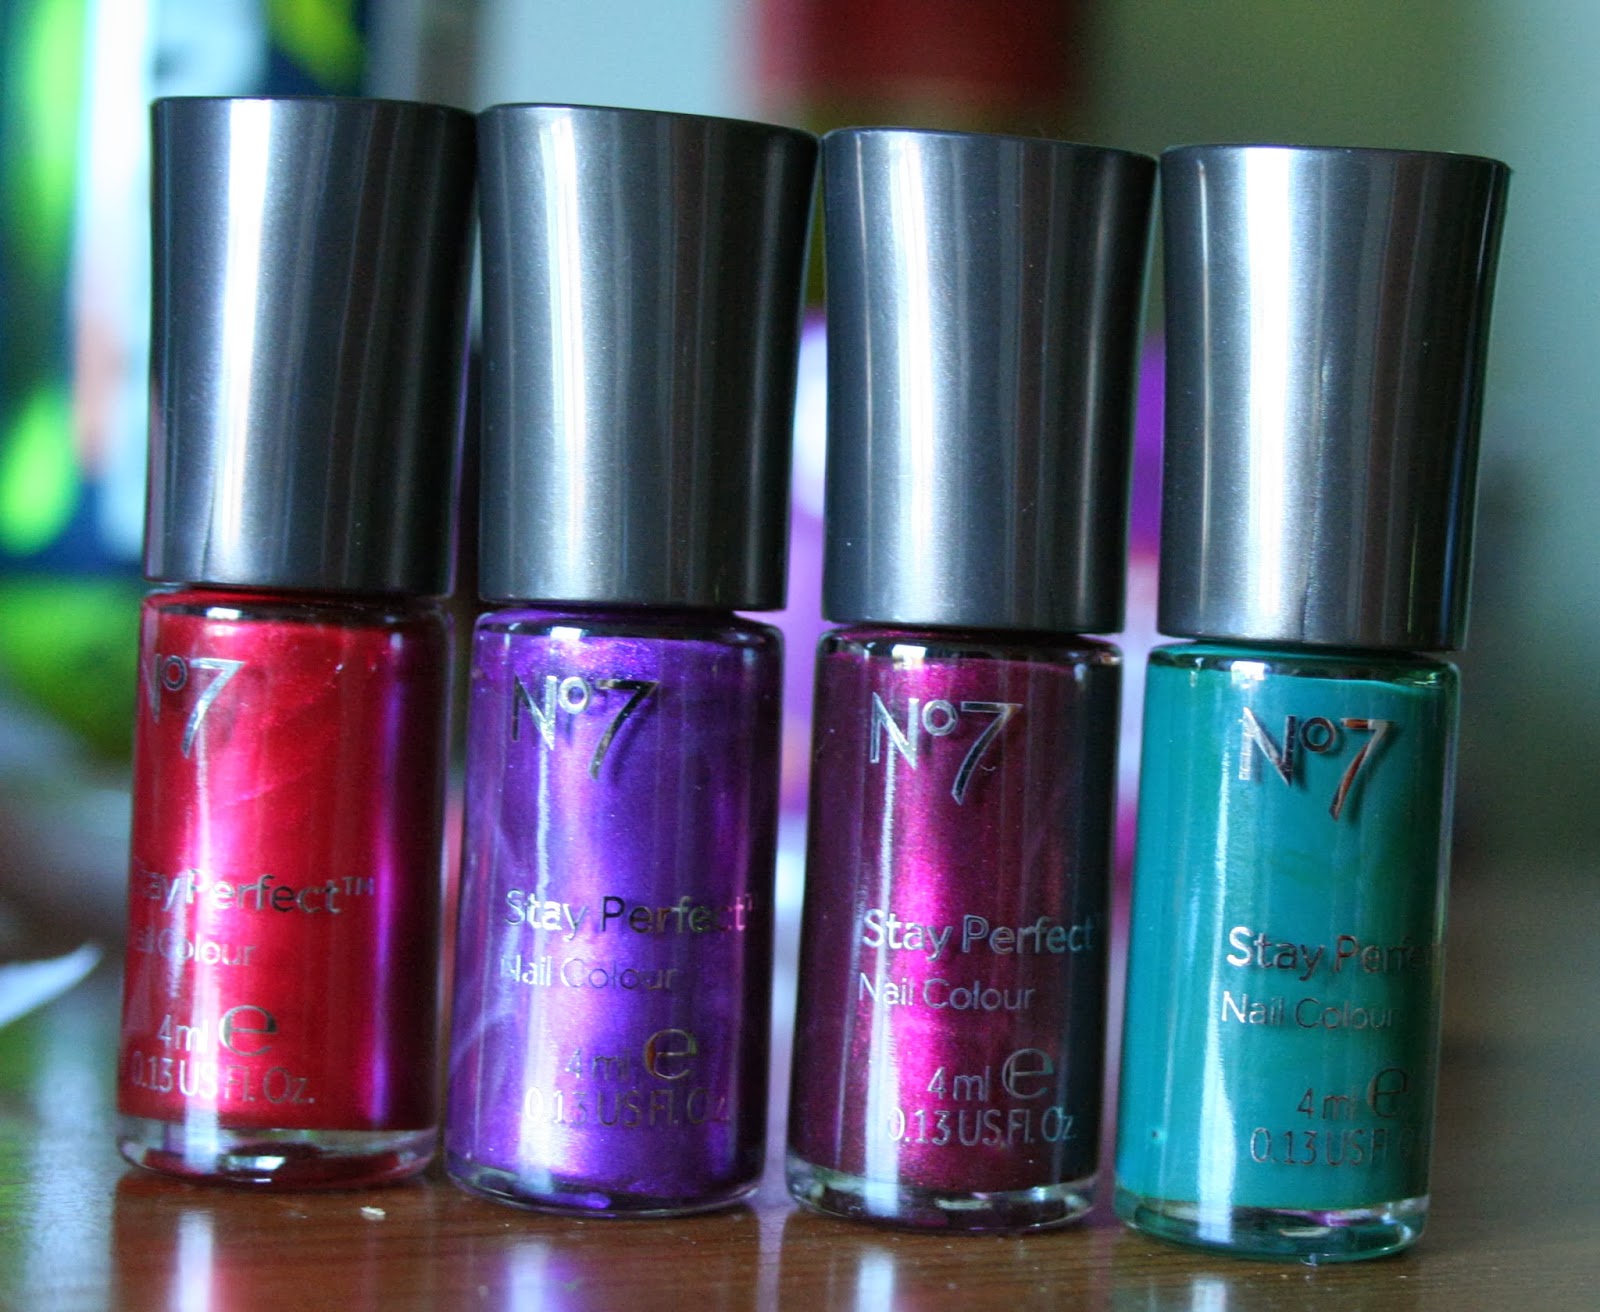 7. "Nail Polish Shades for February: From Classic Reds to Moody Blues" - wide 2